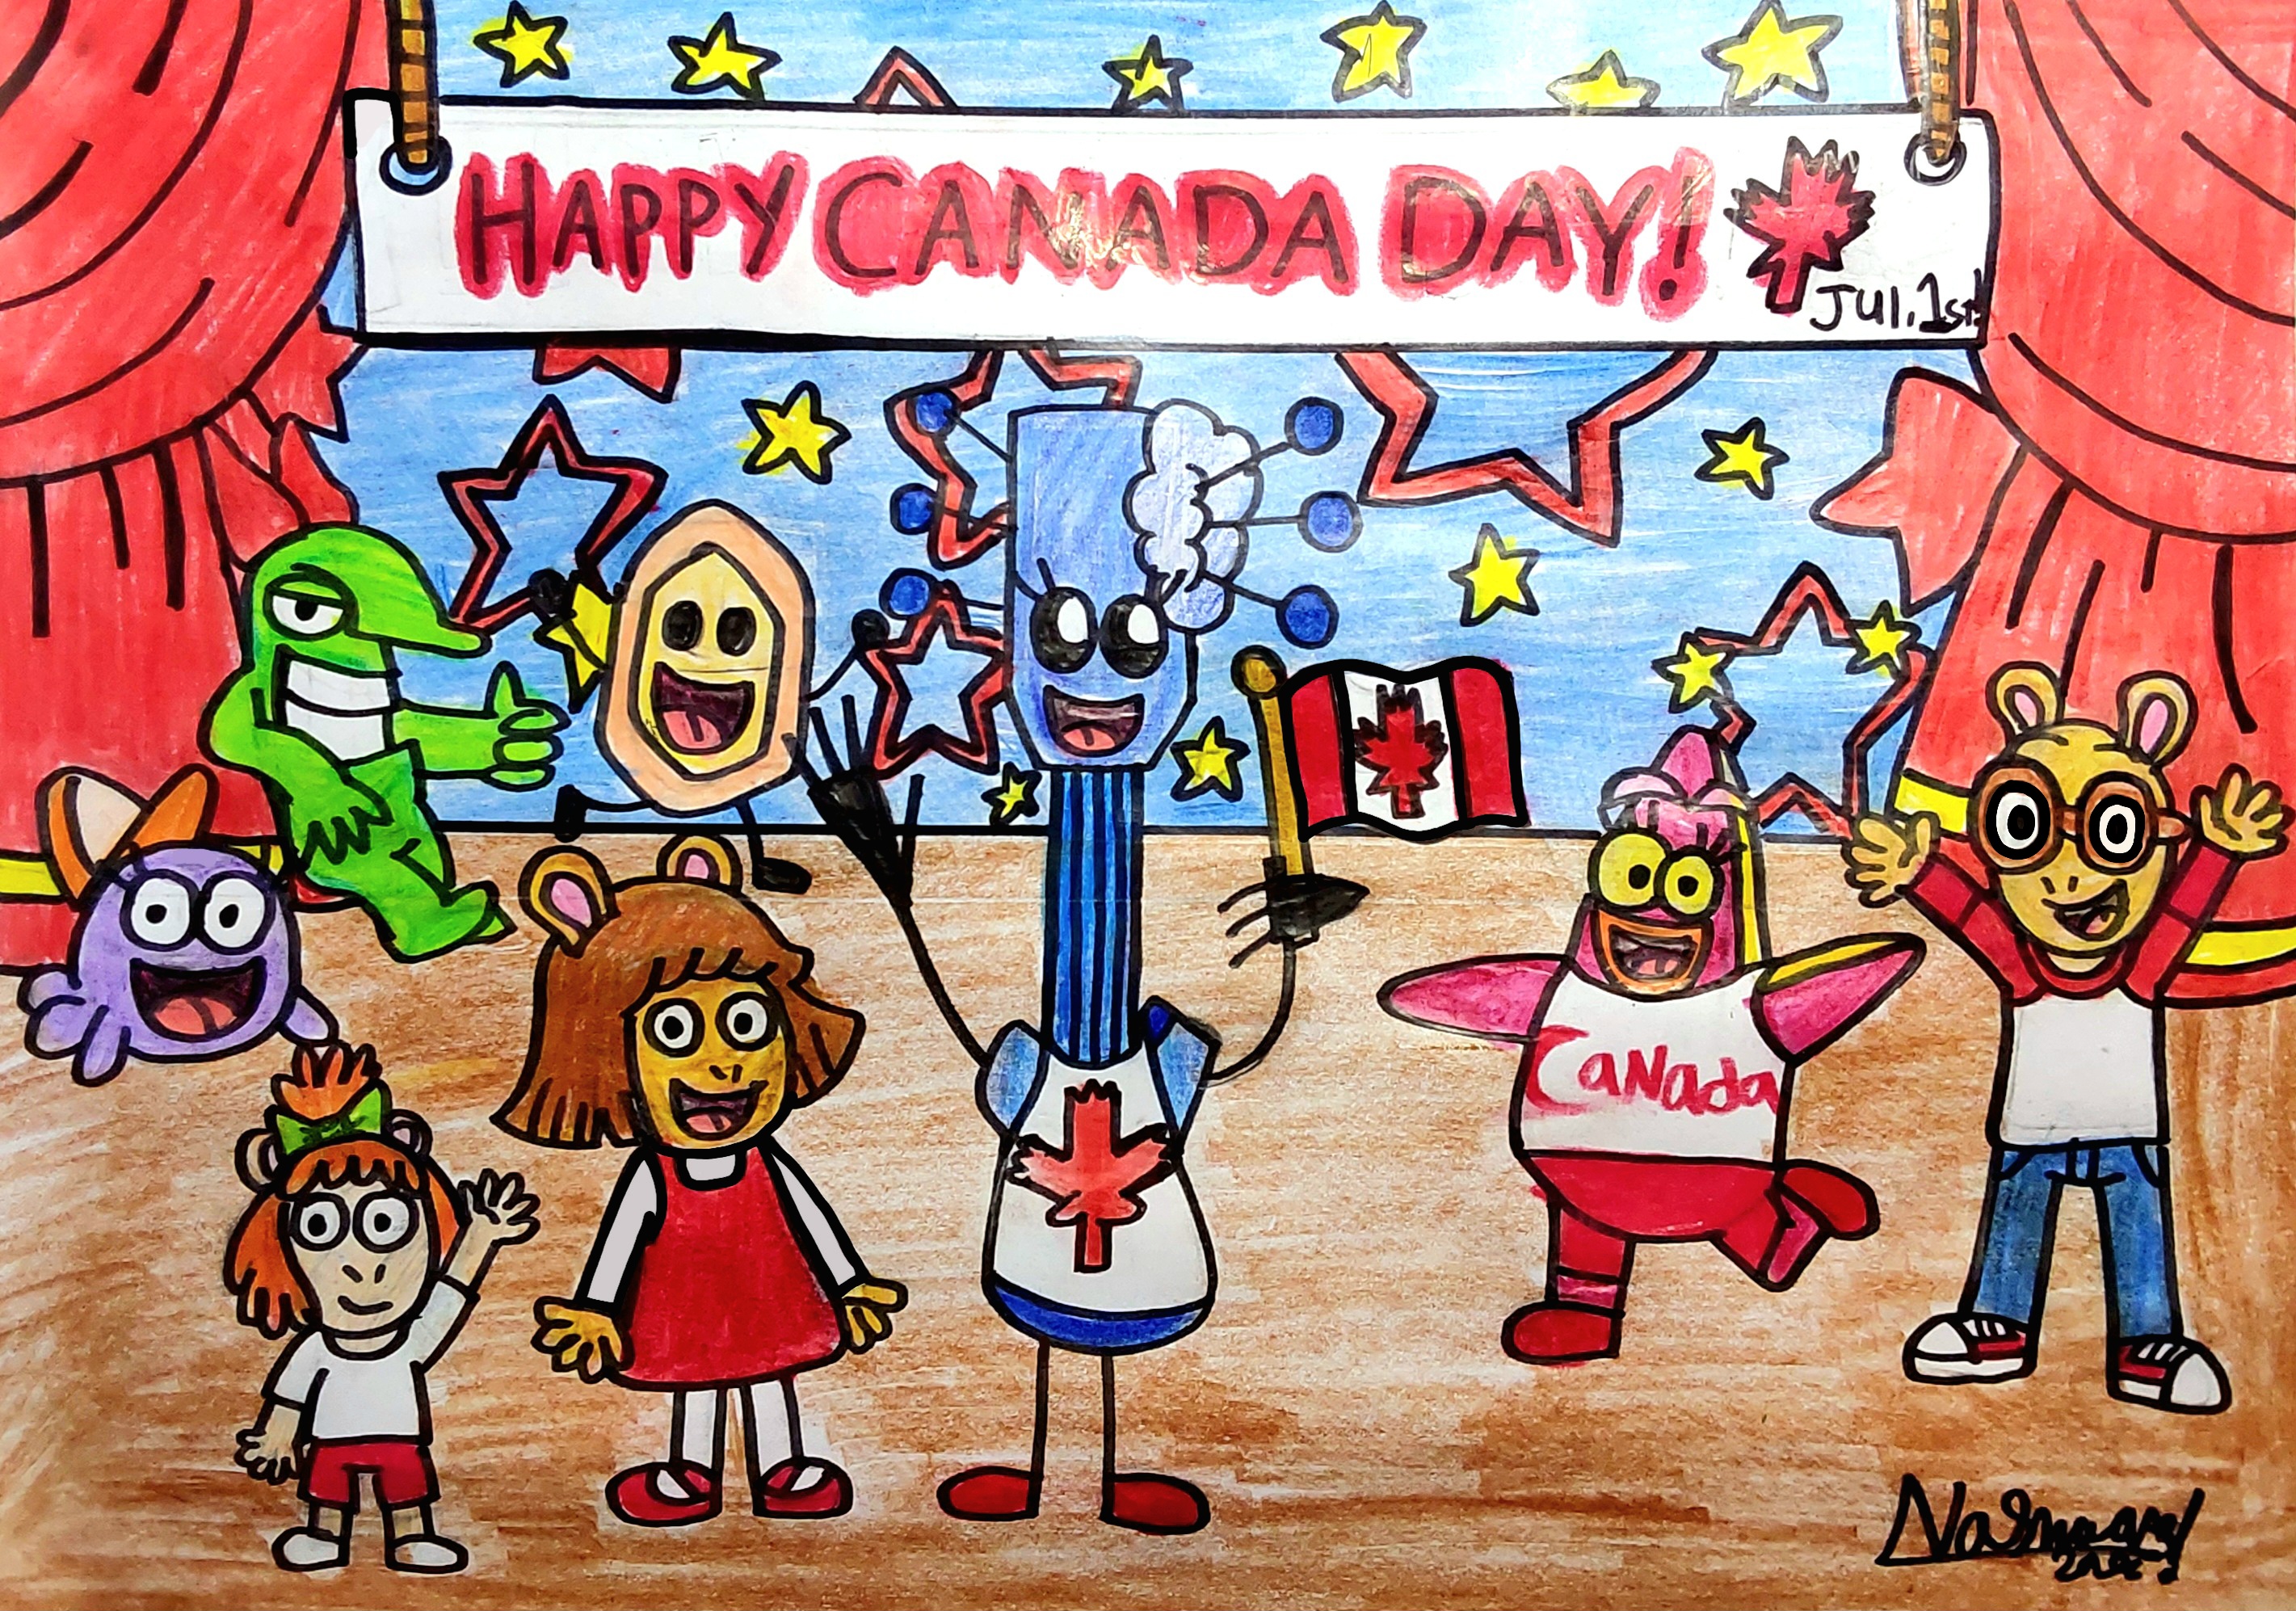 The Crossover's Canada Day Party! by Nashwaputri on DeviantArt